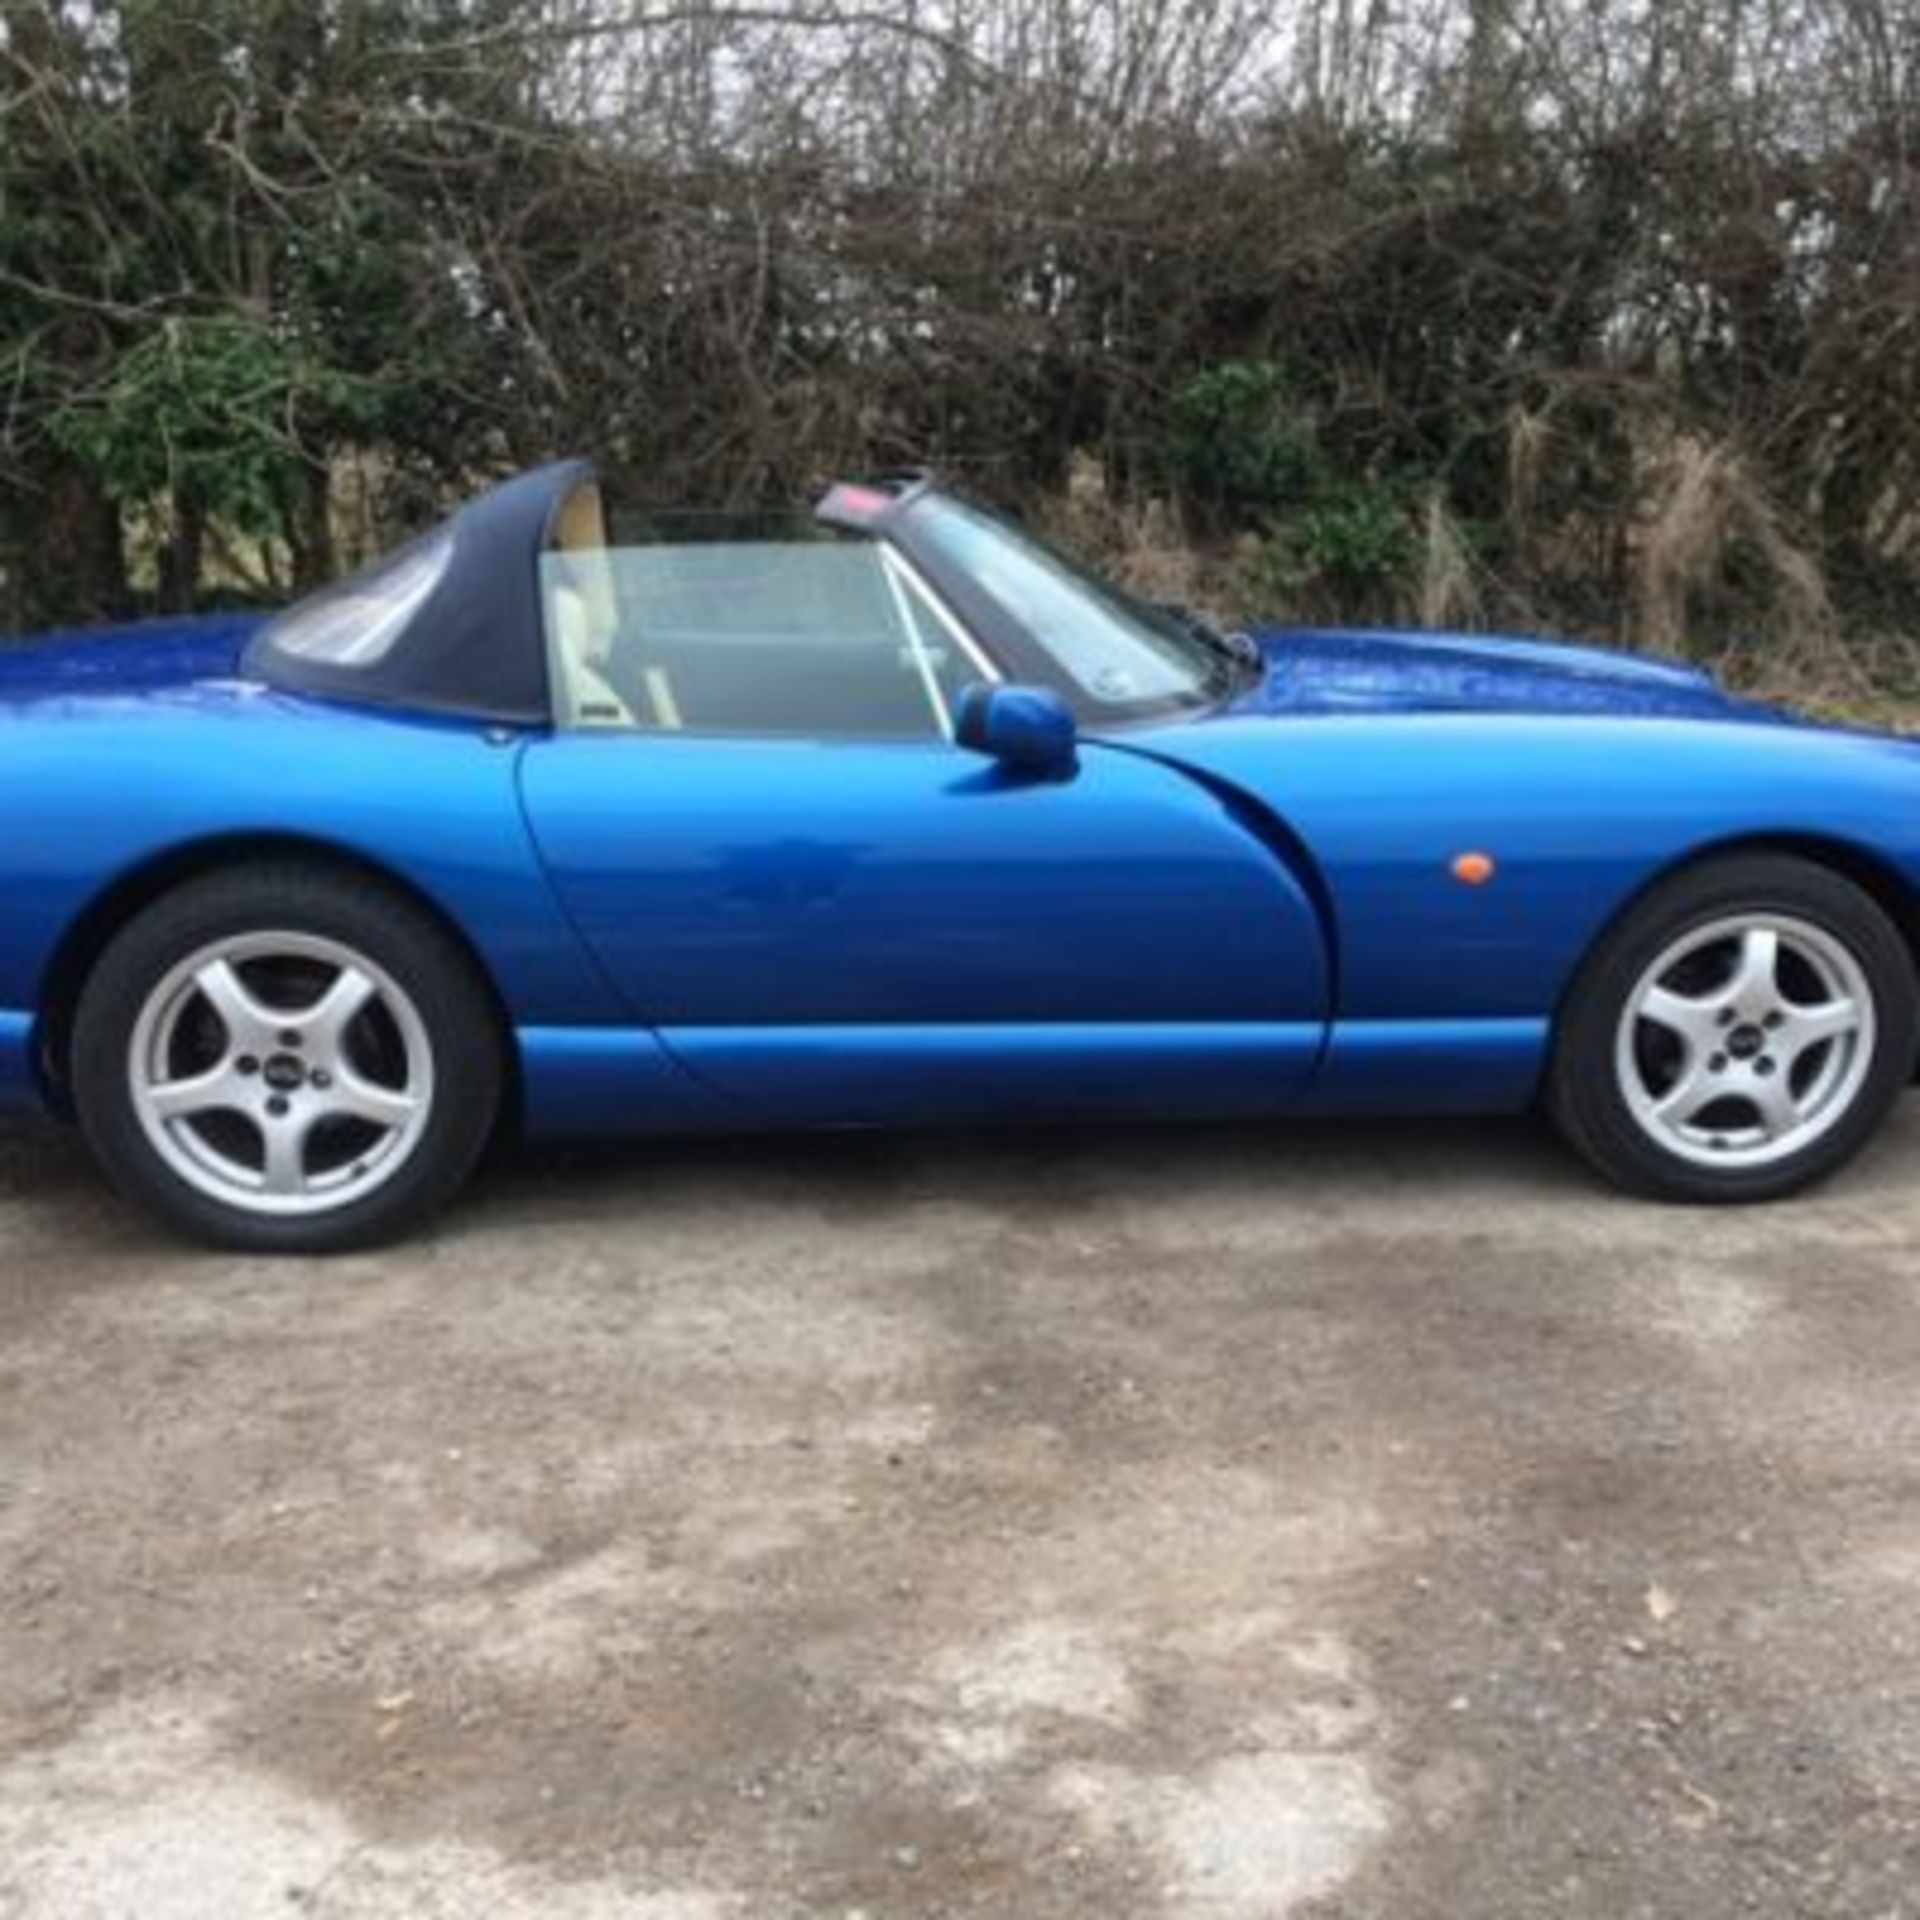 TVR Chimaera 1995 - Now confirmed with us is this very very nice 1995 TVR Chimaera 4.0L and is - Image 3 of 8